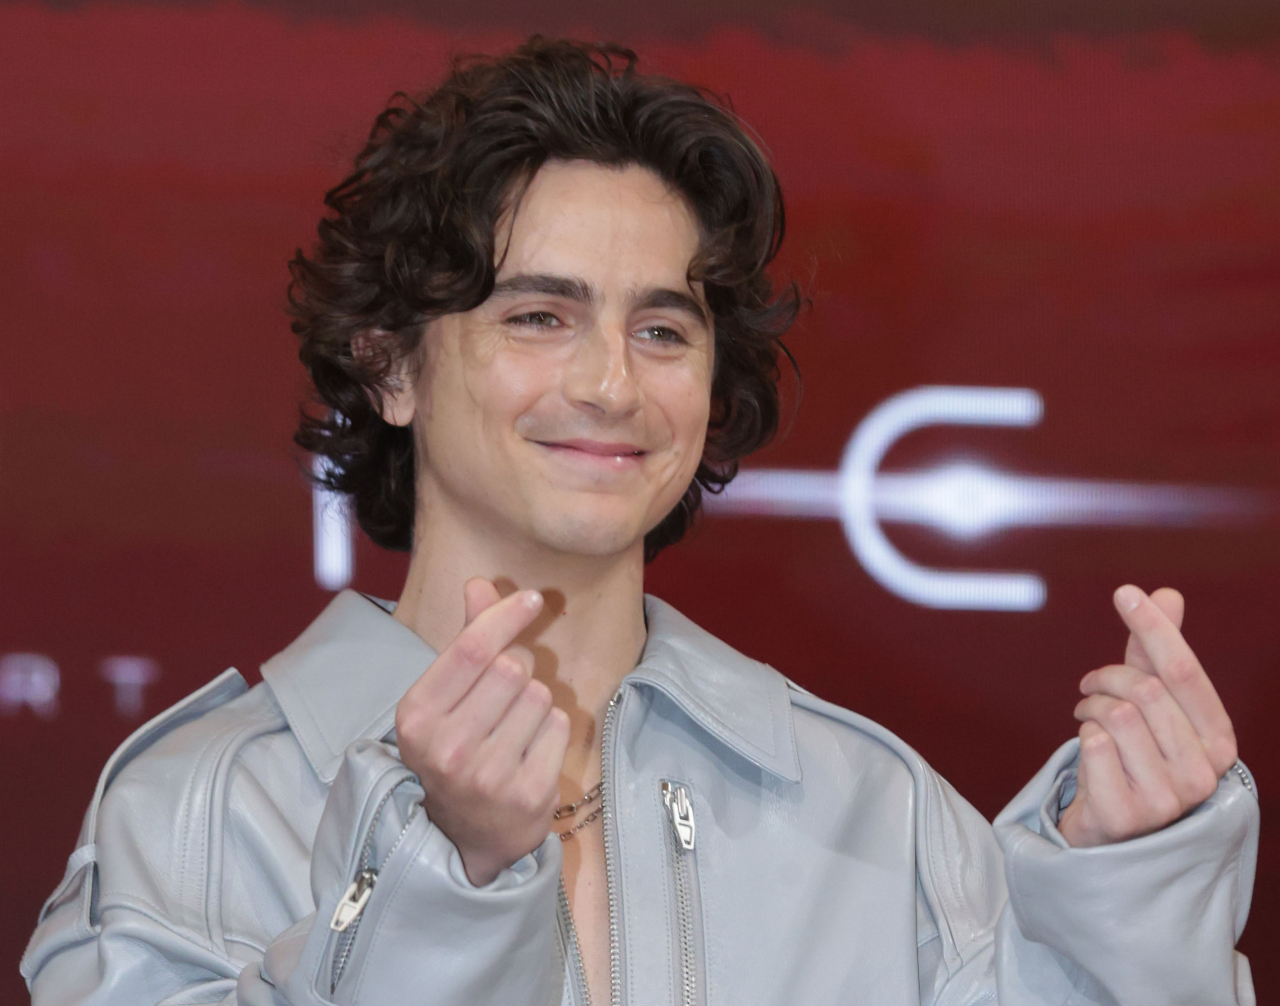 Timothee Chalamet poses for a photo during a press conference held in Seoul to promote his film “Dune: Part Two.” (Yonhap)